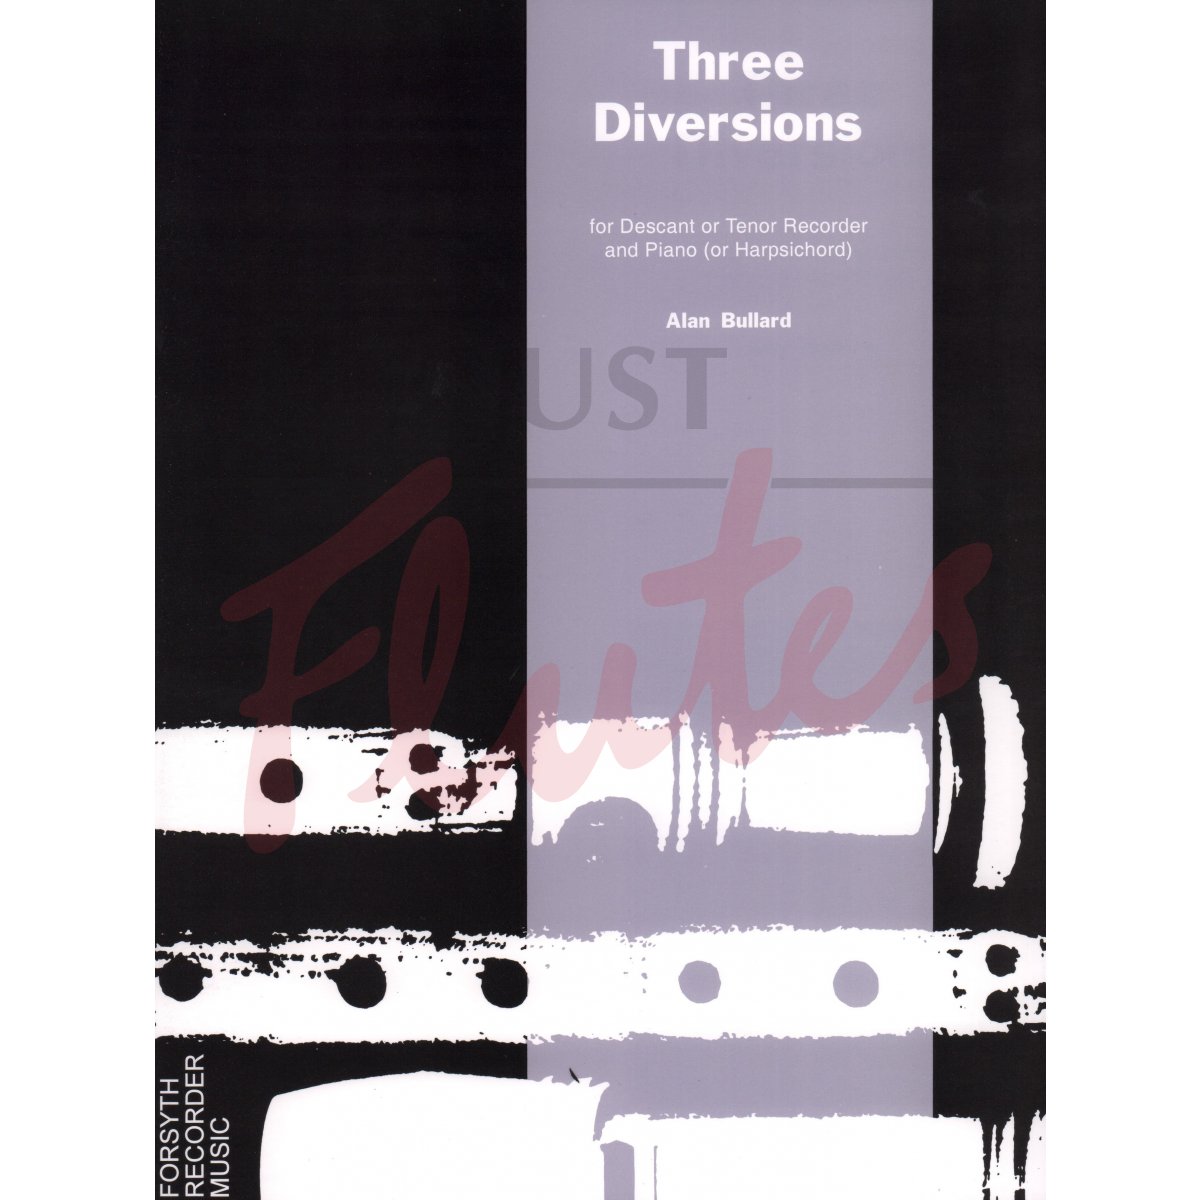 Three Diversions for Descant or Tenor Recorder and Piano